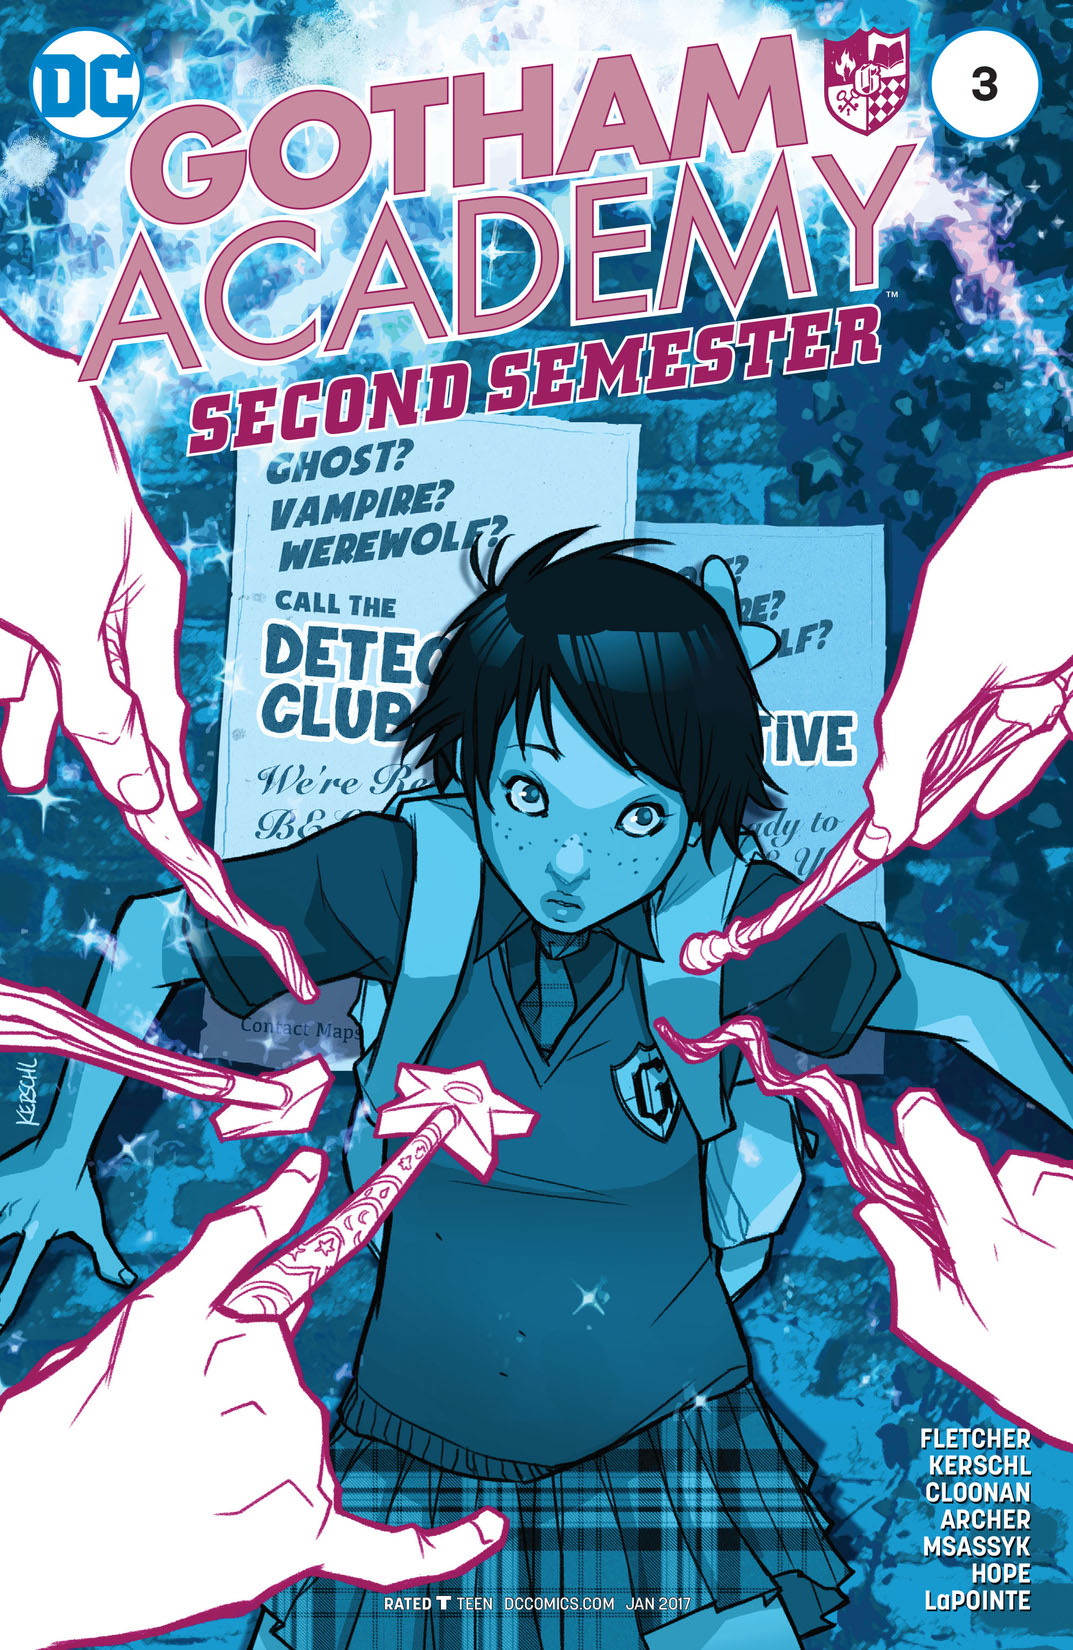 Gotham Academy: Second Semester #3 preview images